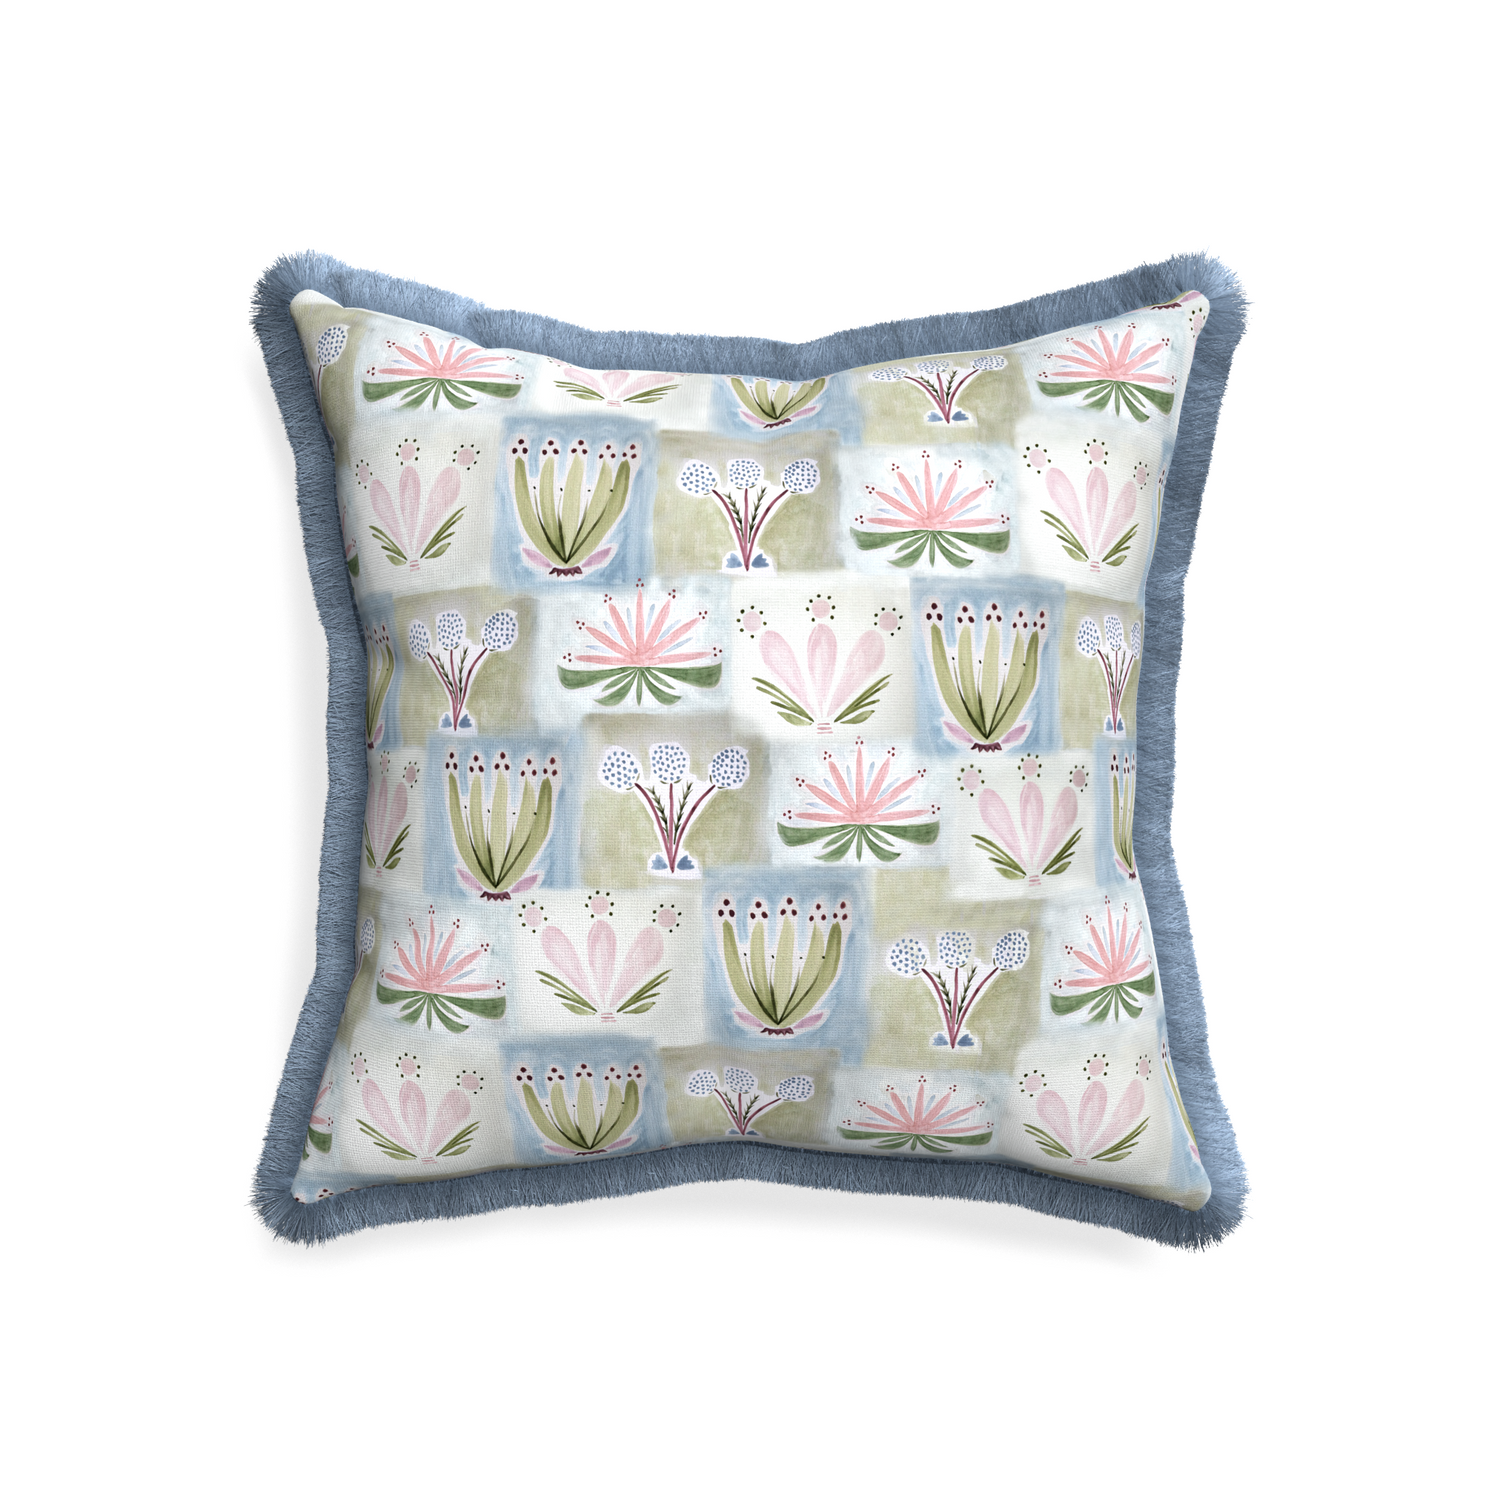 20-square harper custom hand-painted floralpillow with sky fringe on white background